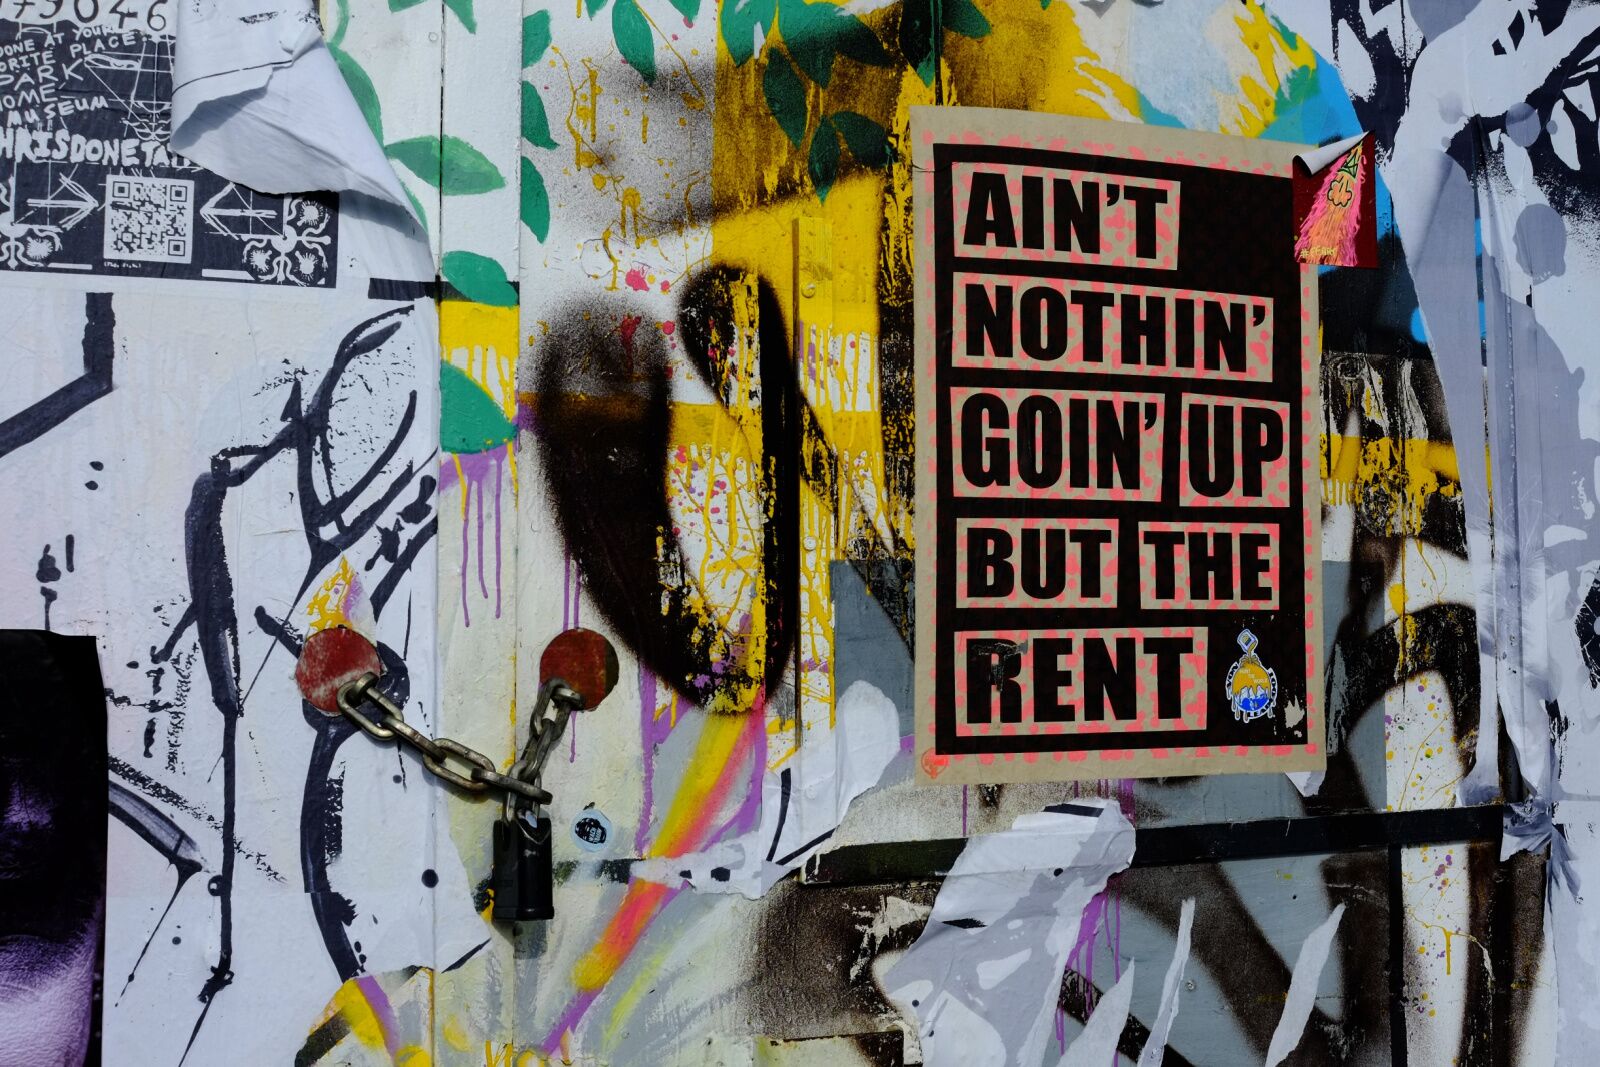 anywhere workers and gentrification -- rent sign